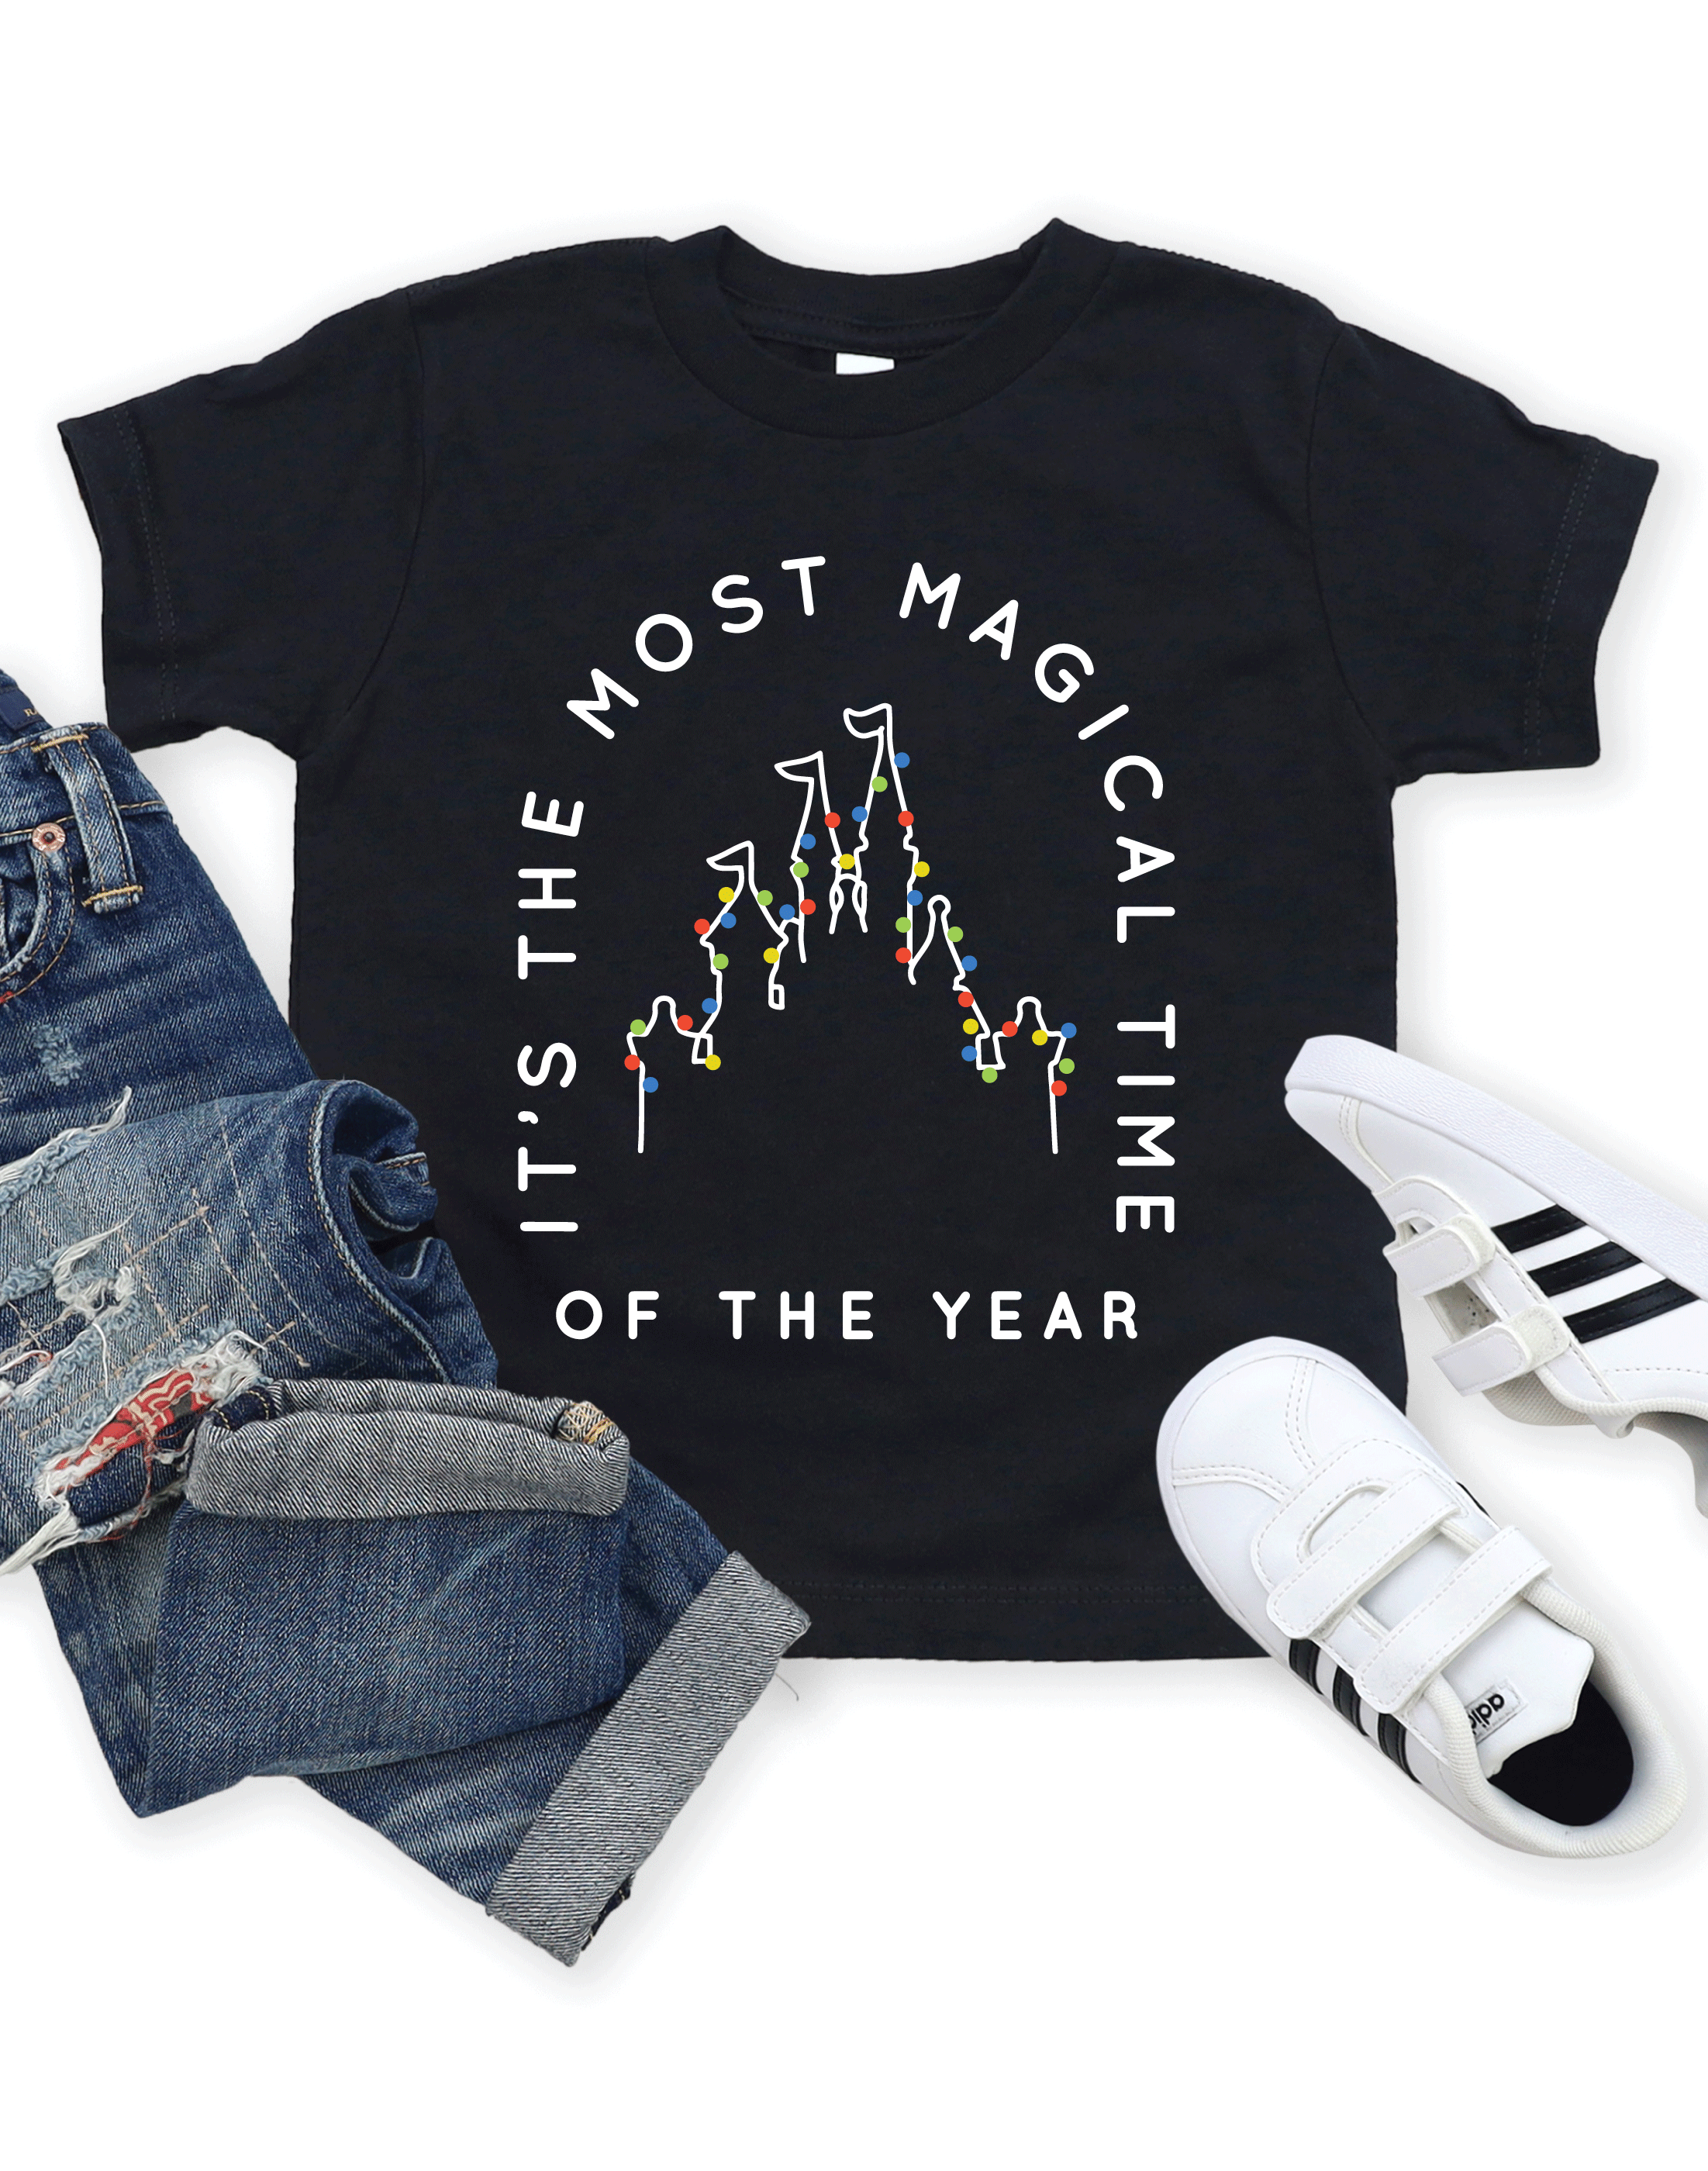 Most Magical Time of the Year || Kid's Short Sleeve Tee